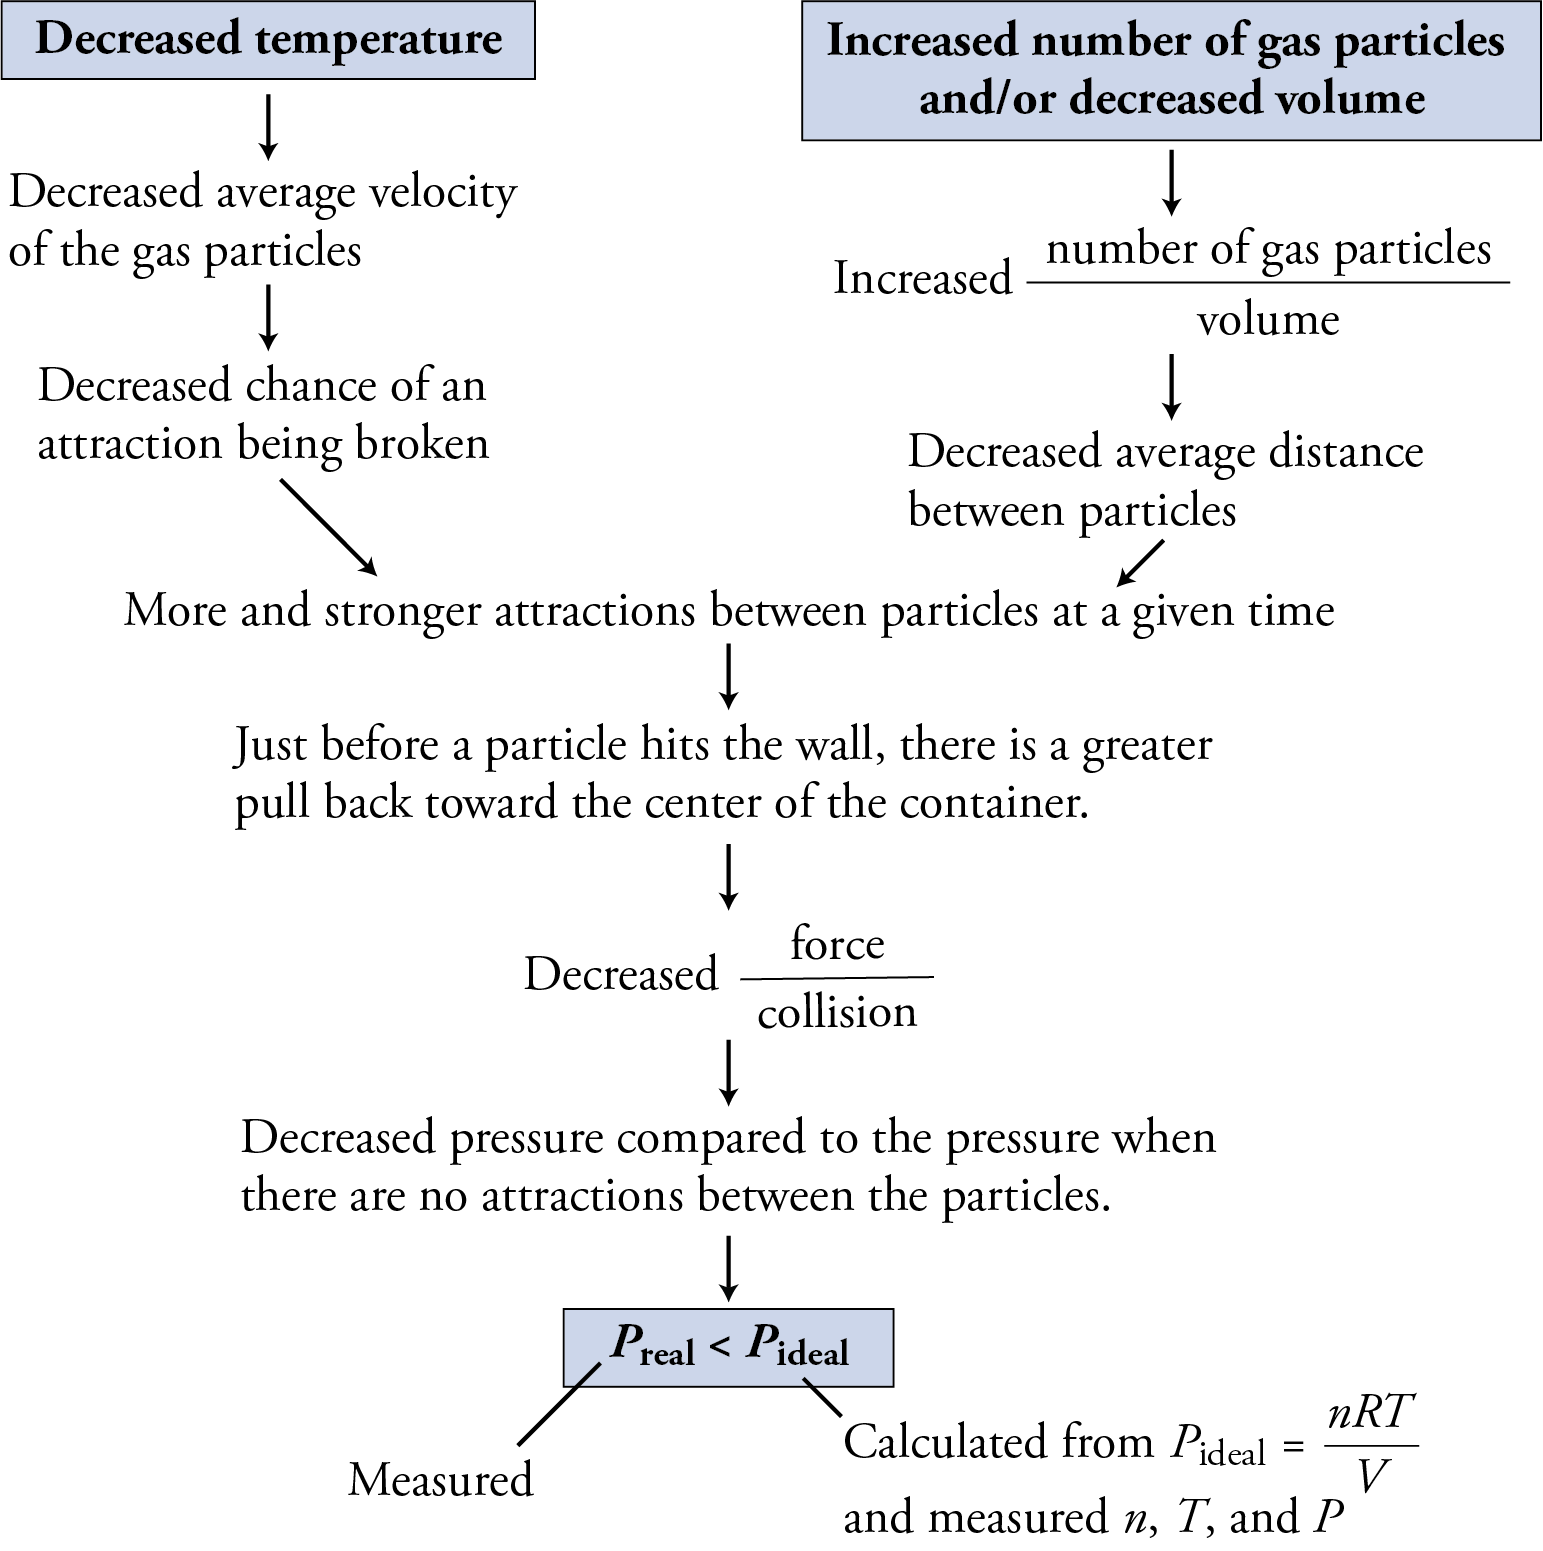 Image showing the logic behind why decreased temperature and increased number of gas particles and/or decreased volume leads to greater decrease in the real gas pressure compared to the gas pressure predicted by the ideal gas equation.